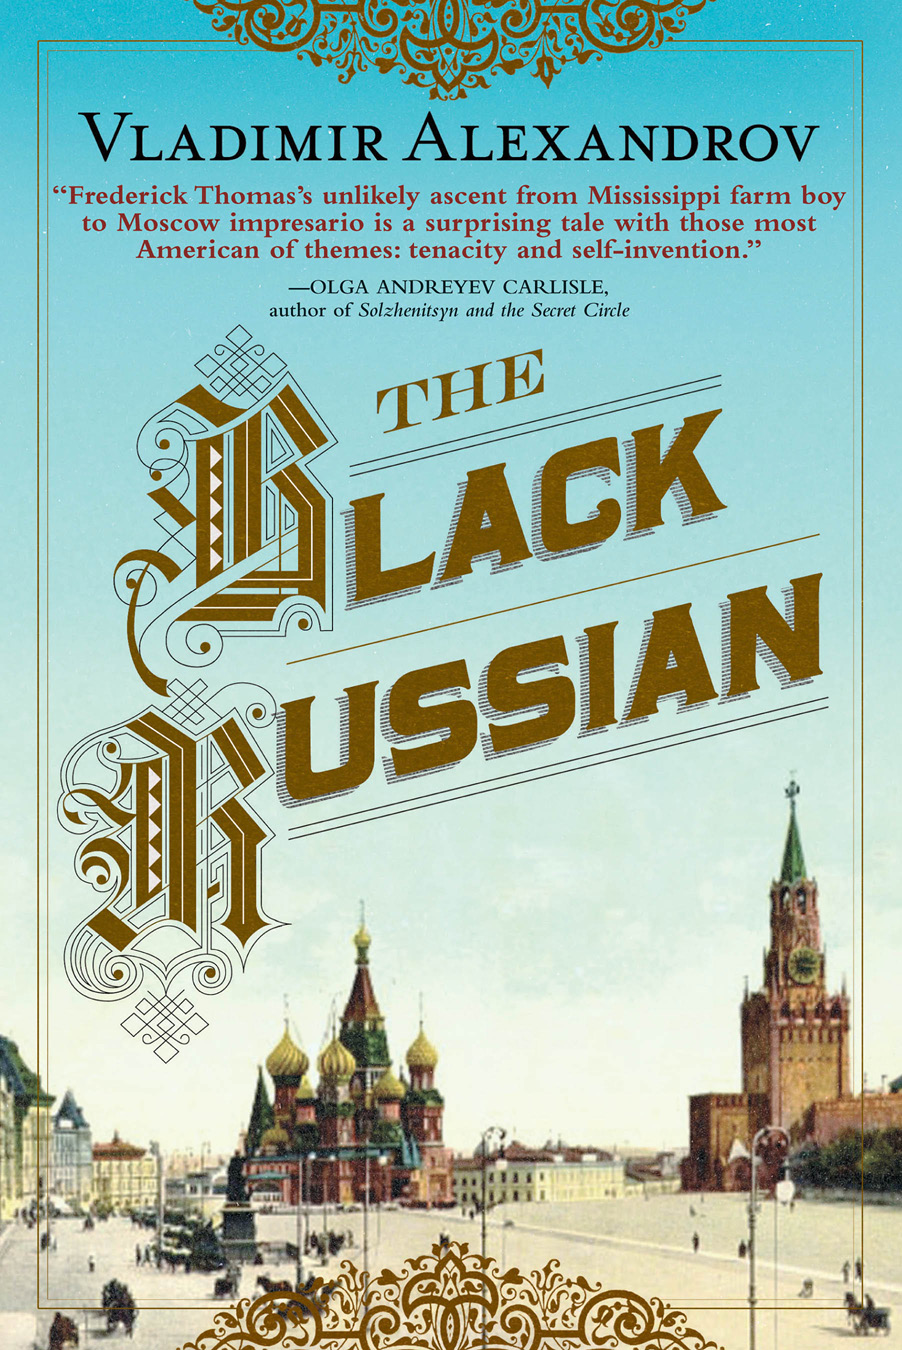 THE BLACK RUSSIAN Also by Vladimir Alexandrov Andrei Bely The Major - photo 1